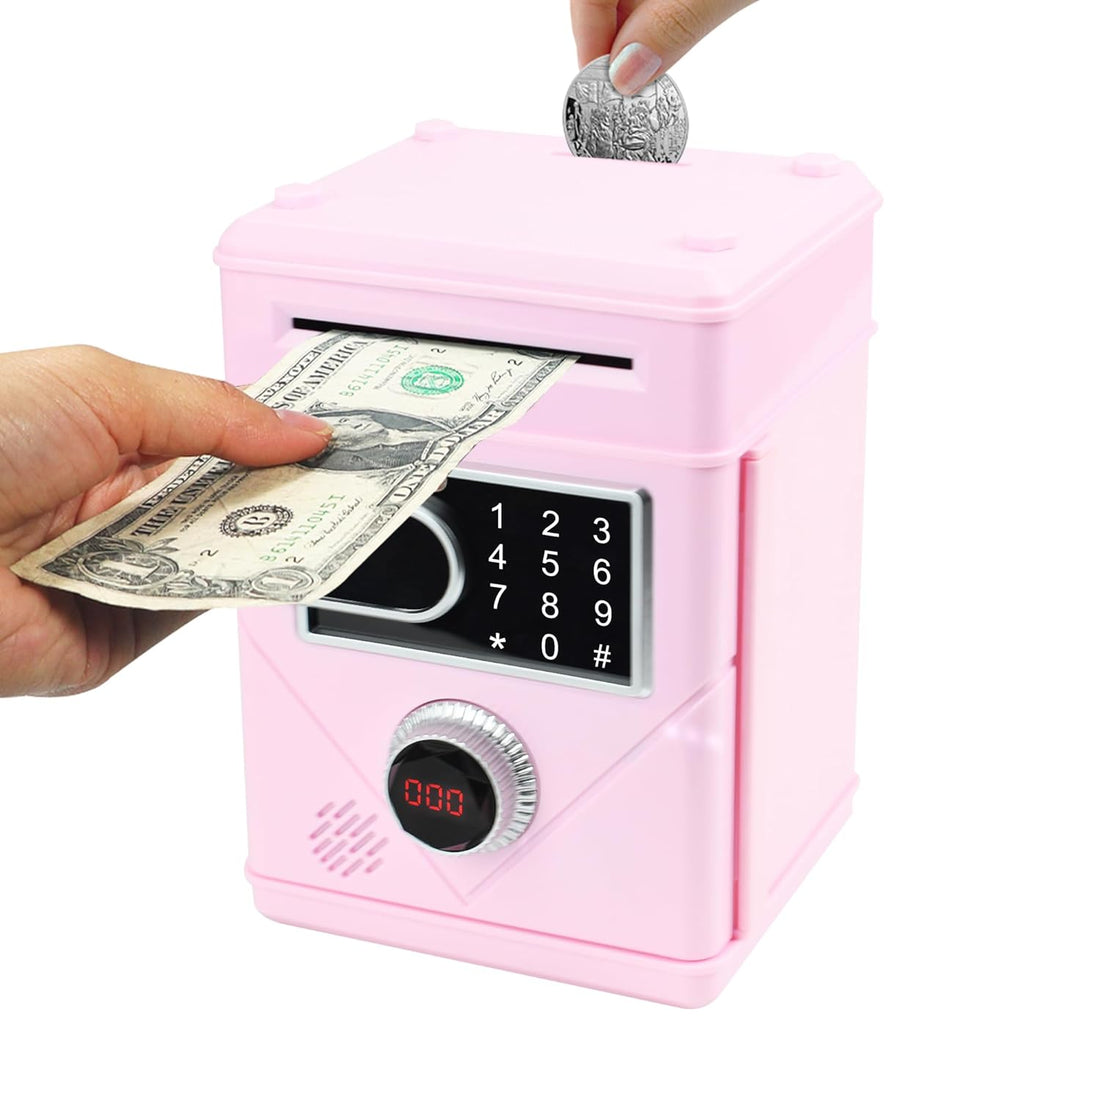 Veilxty Touch Screen Piggy Bank Electronic Password Piggy Bank for Kids, Music Piggy Bank Counting Money Bank Coin Bank ATM Banks for Boys and Girls (Pink)